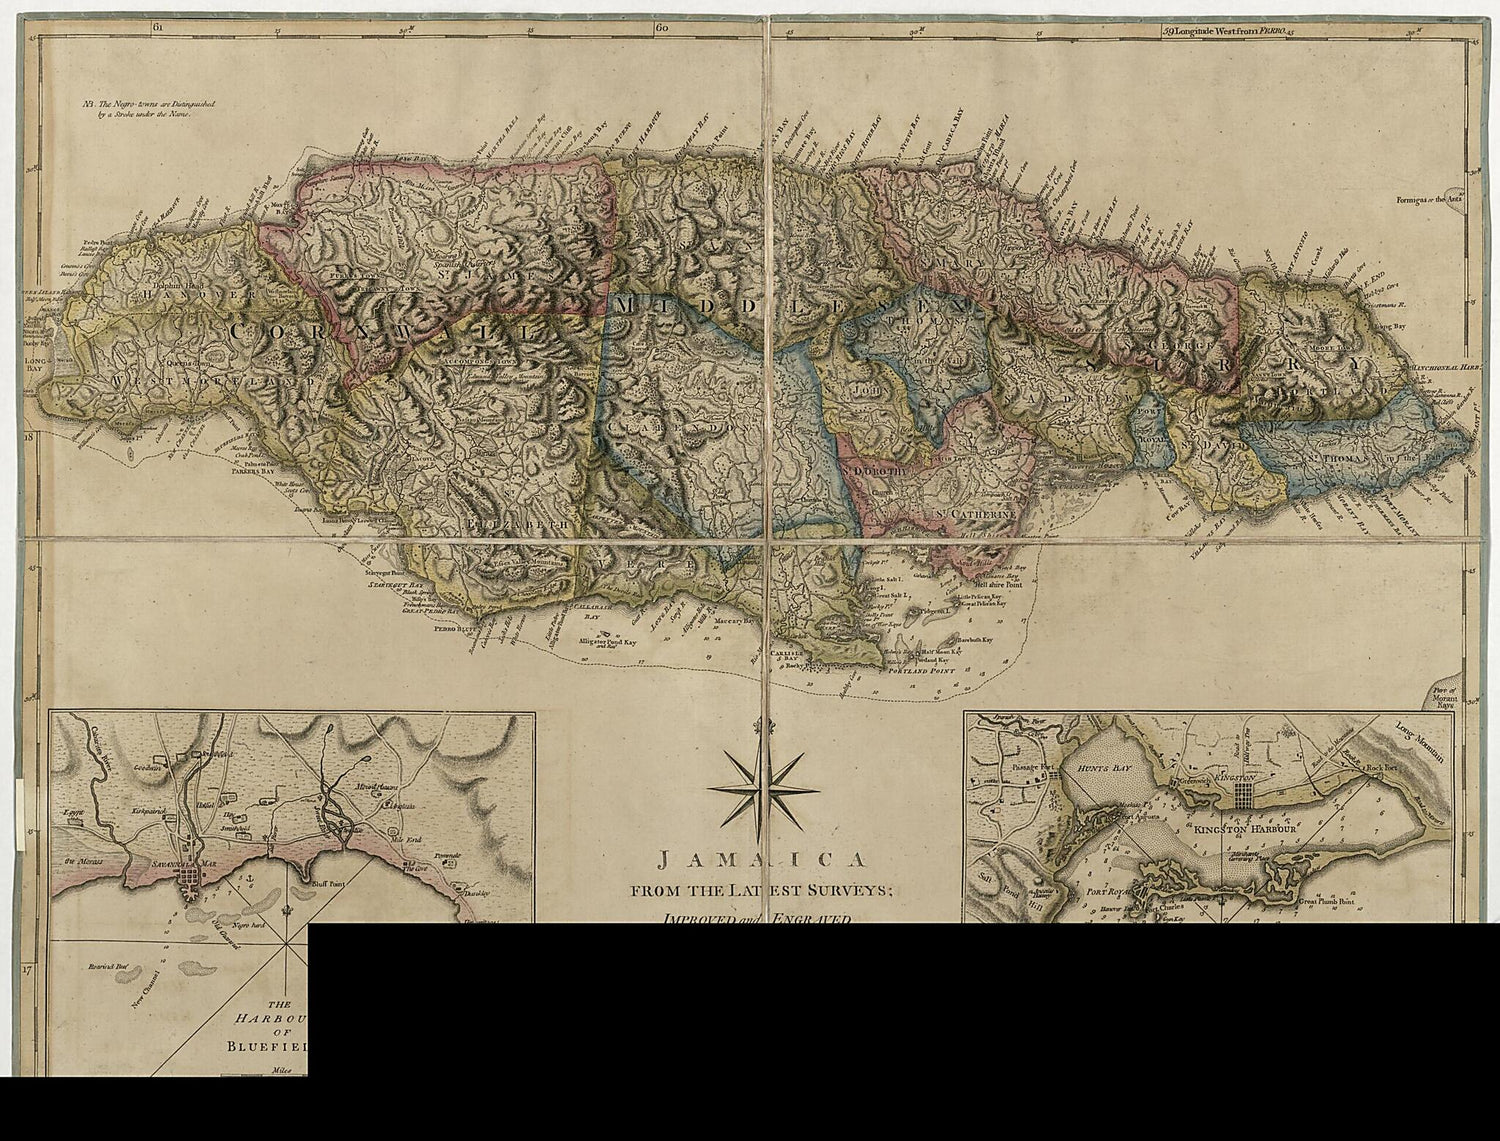 This old map of Jamaica, from the Latest Surveys from 1775 was created by Thomas Jefferys, Robert Sayer in 1775